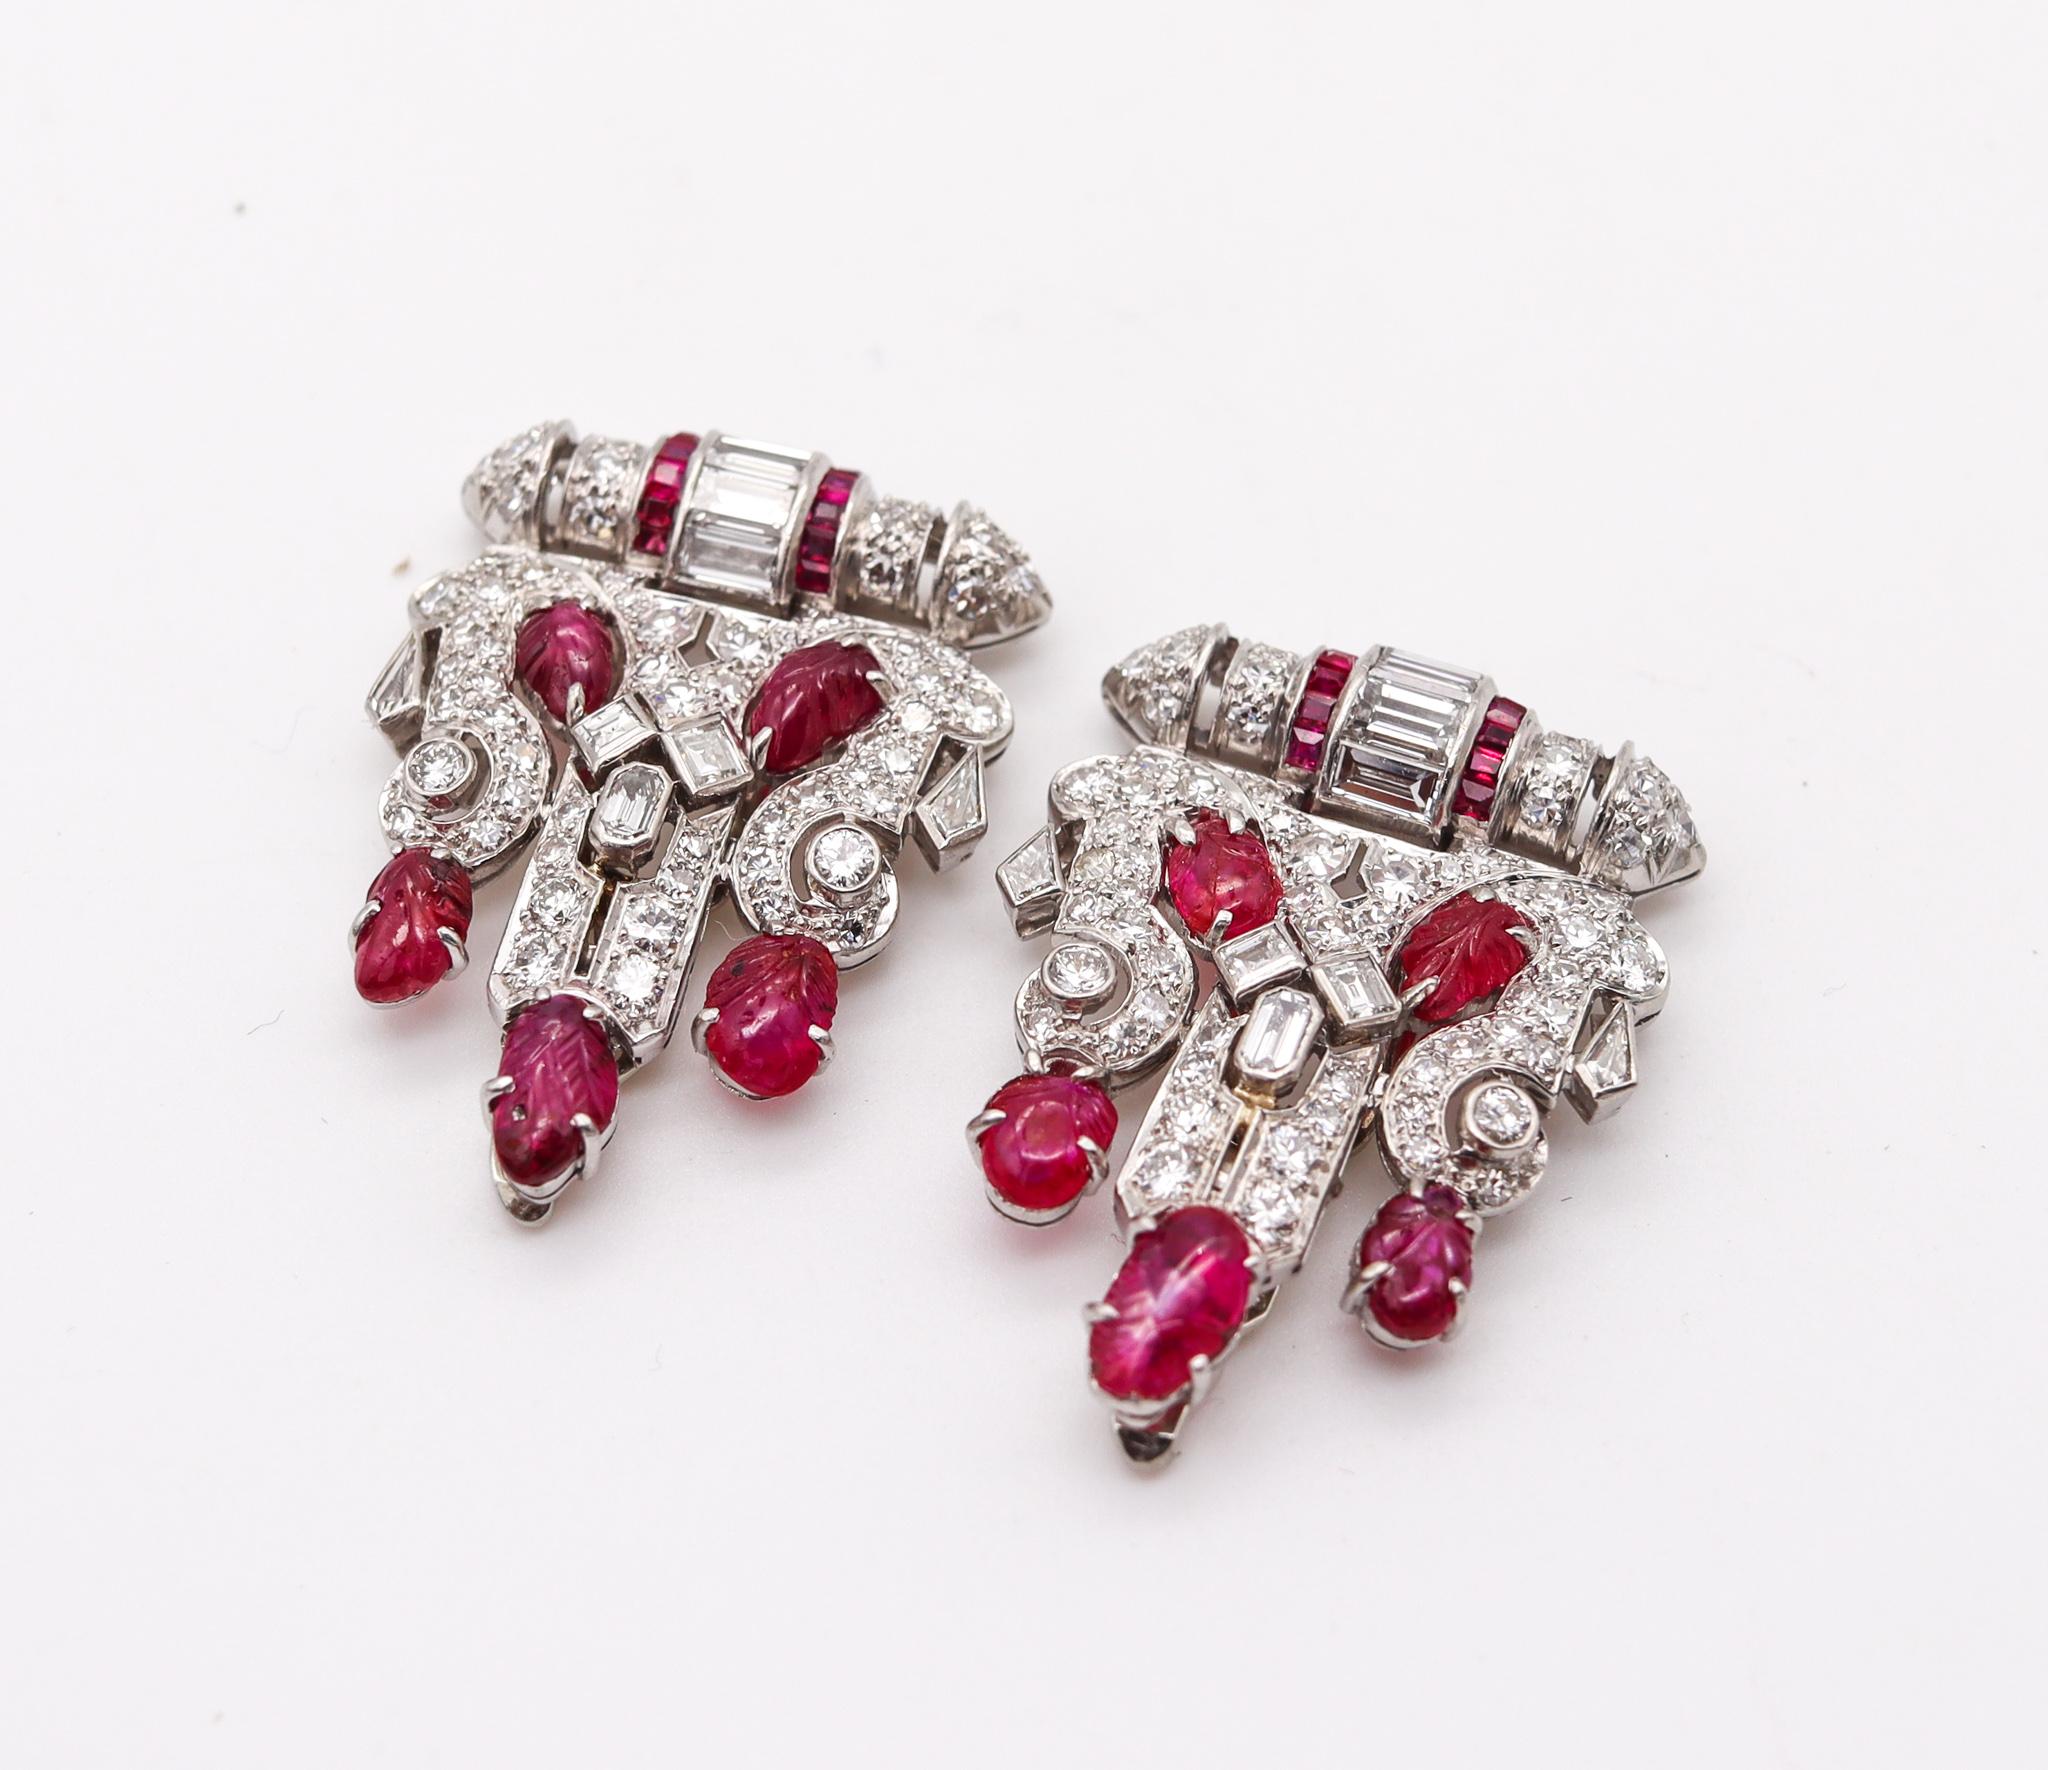 Women's Art Deco 1925 Pair of Dress Clips in Platinum with 11.54 Ctw Diamonds and Rubies